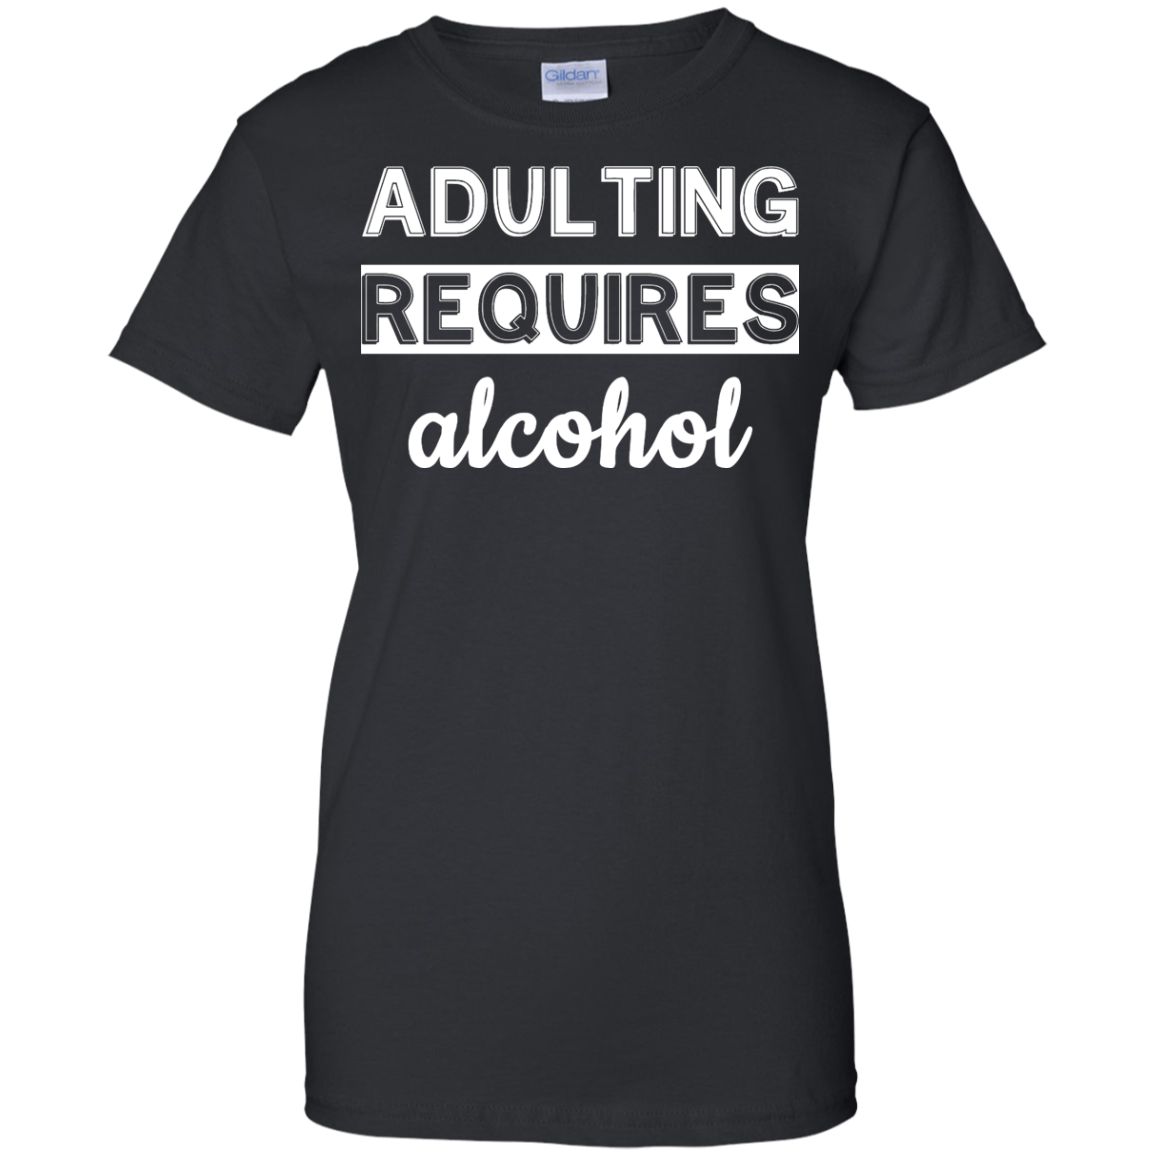 Adulting requires alcohol funny shirt, tank top, hoodie#N#– iFrogTees